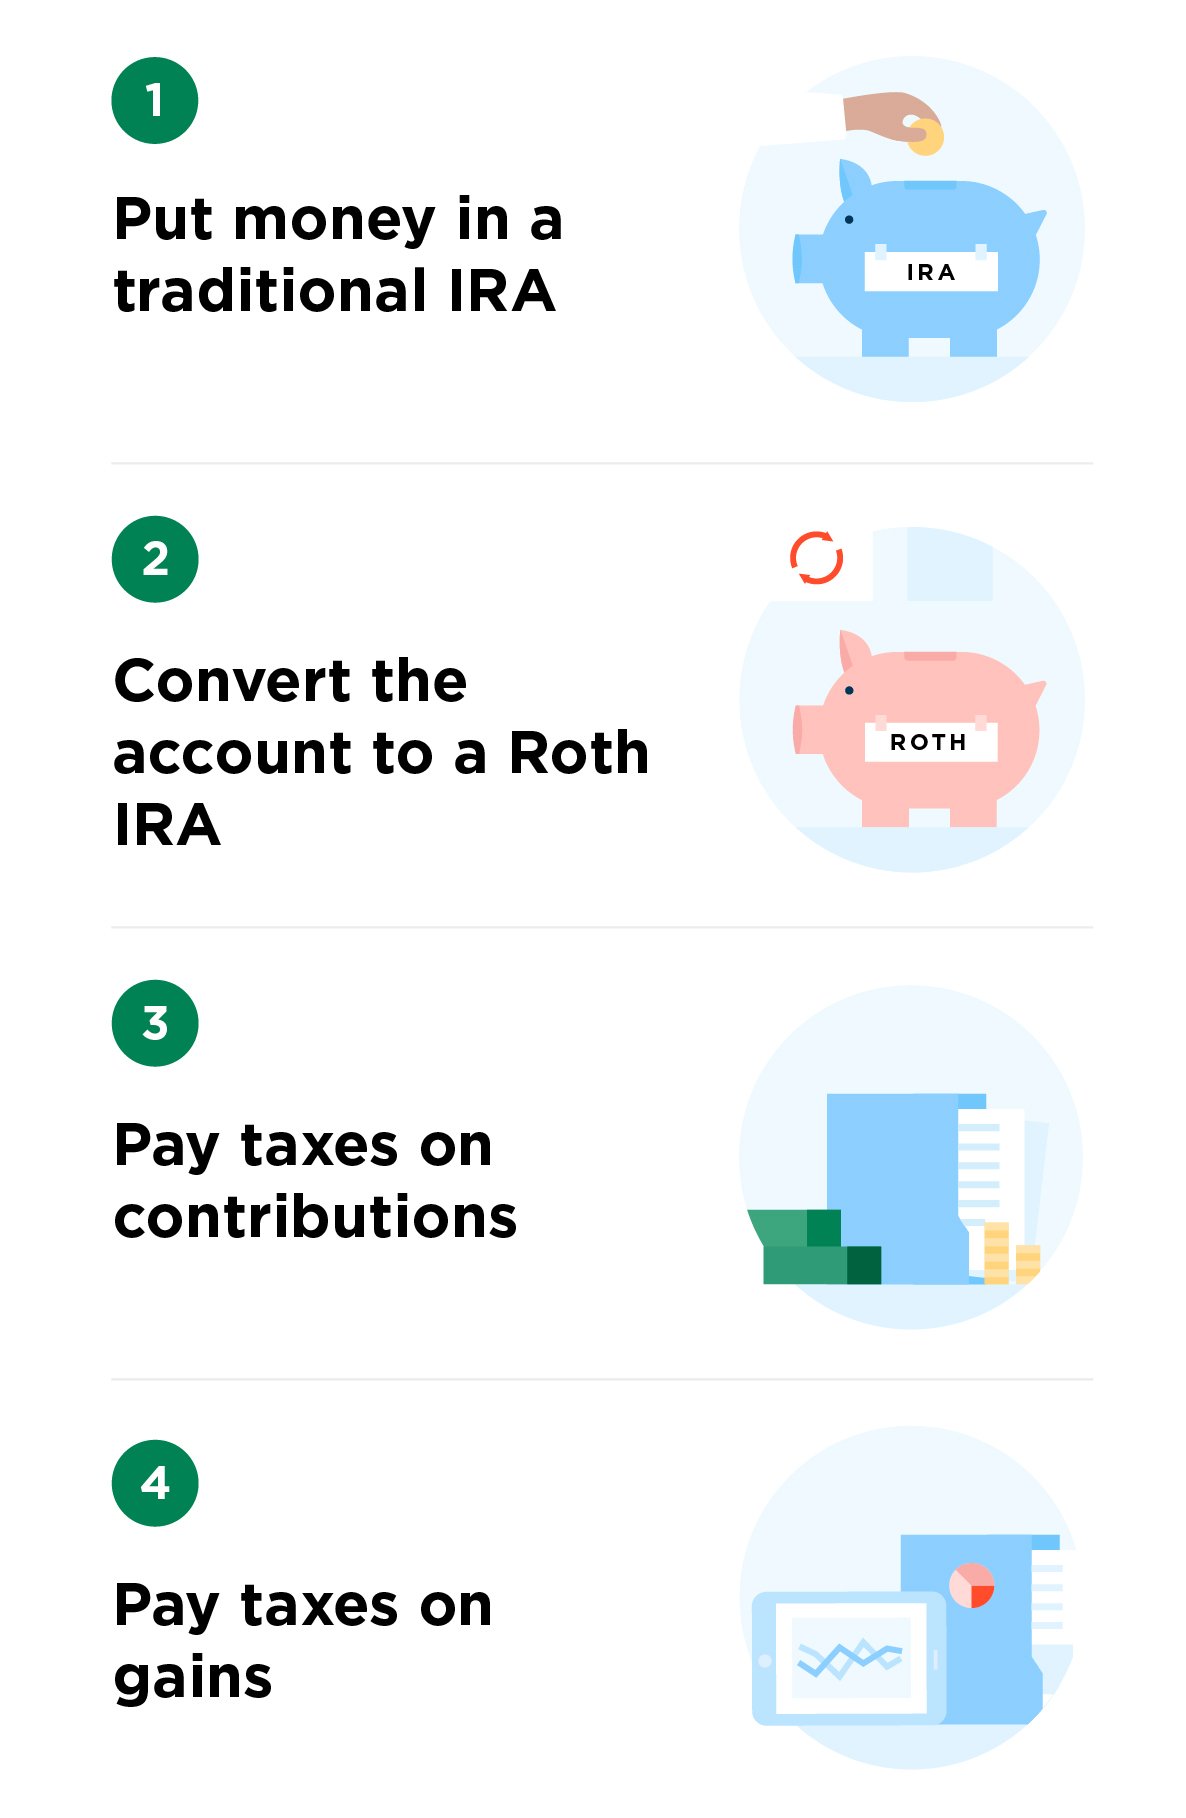 Backdoor Roth IRA: What It Is and How to Set One Up - NerdWallet